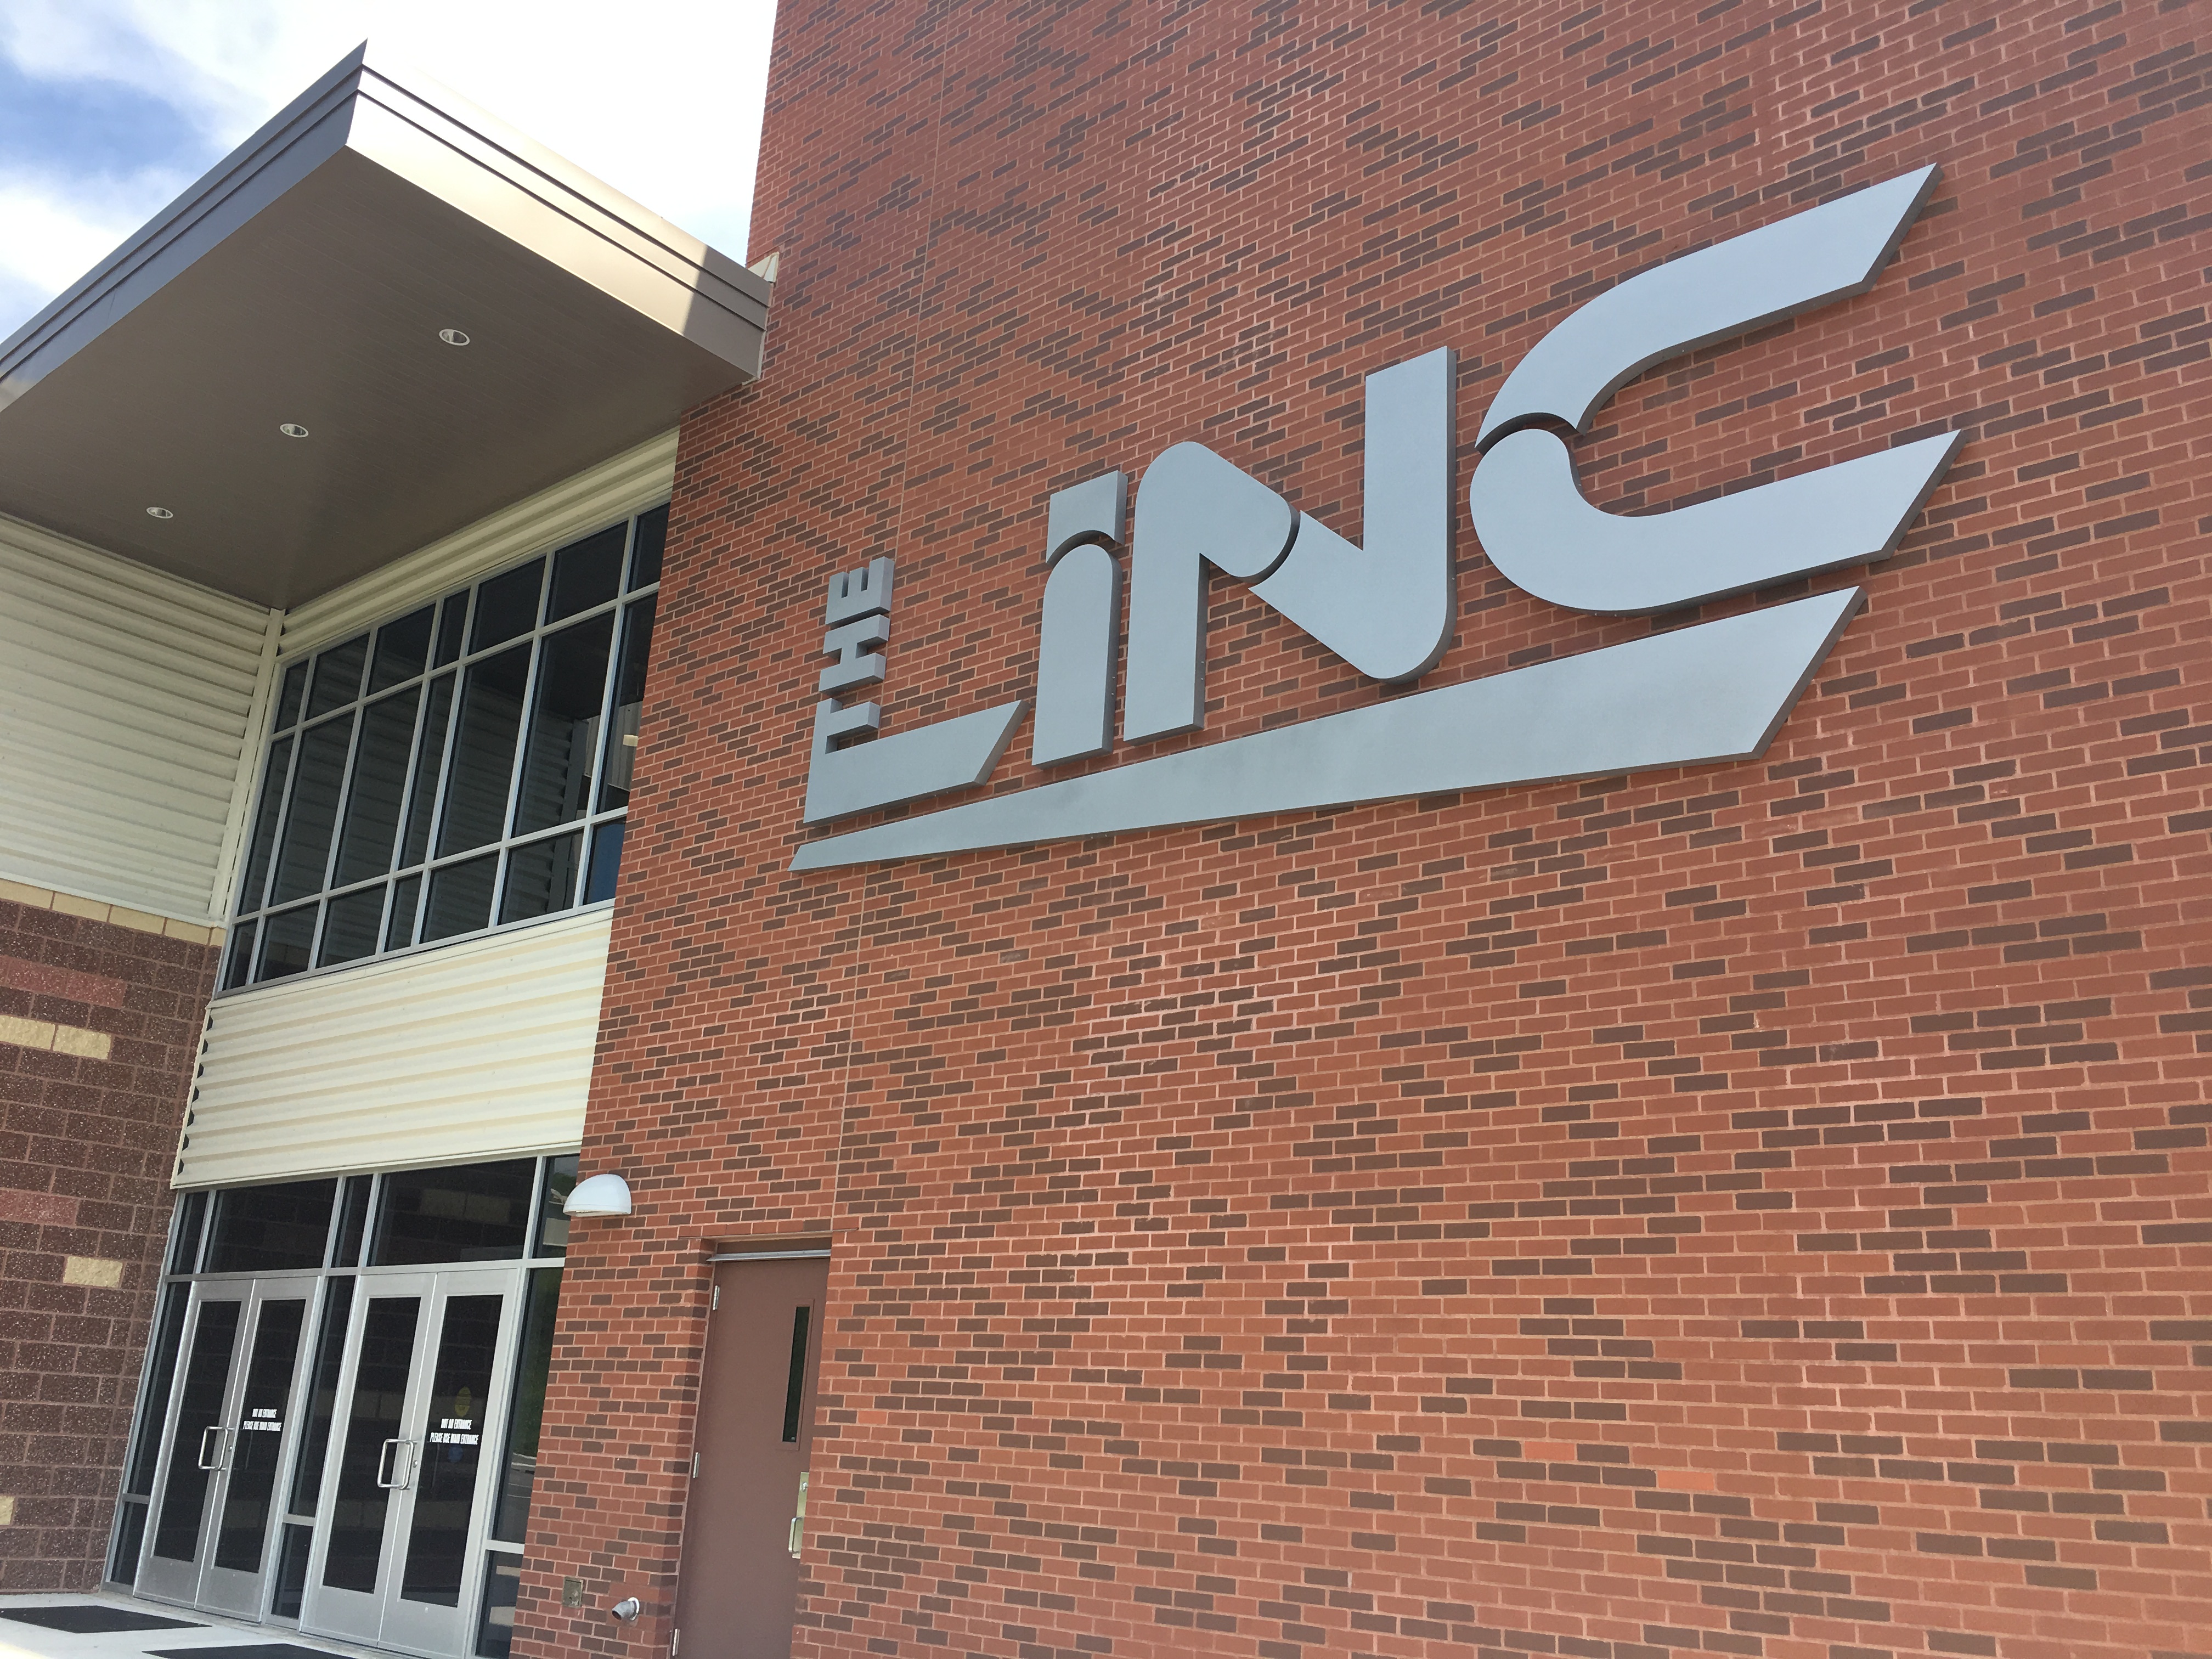 Thanks to a new partnership between The Linc, a wellness and recreation center jointly owned and operated by Lincoln University of Missouri and JC Parks, and Studio 573, members of each gym can use both facilities at a joint membership price of $80 a month. Photography credit: JC Parks.